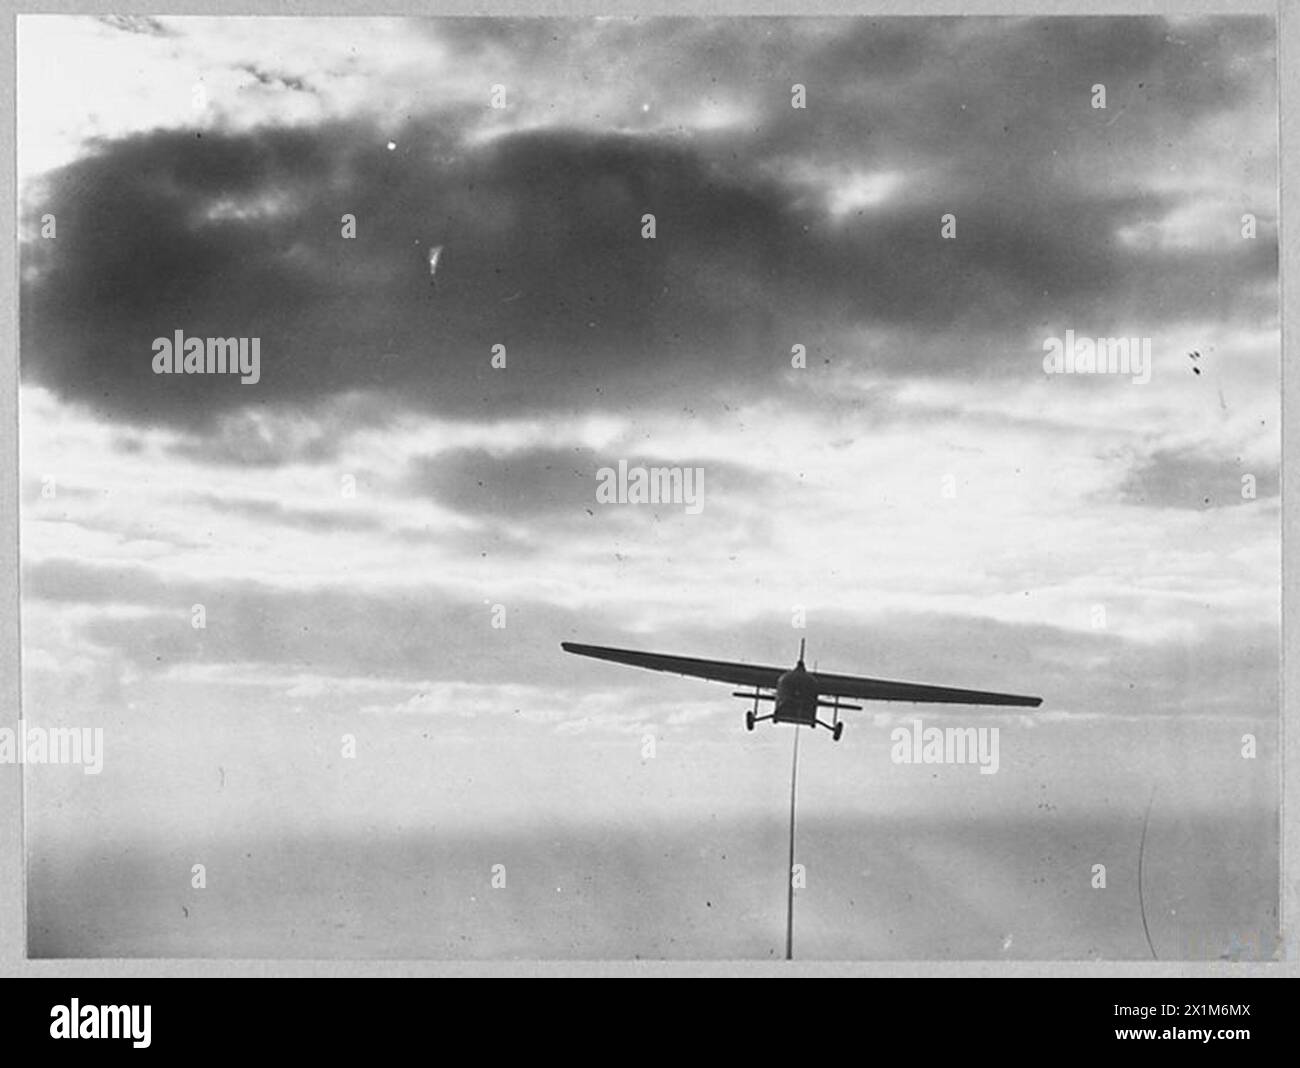 THE HAMILCAR GLIDER - Picture (issued 1944) shows - The Hamilcar glider in flight. It has been revealed that this glider can carry a tank, Royal Air Force Stock Photo